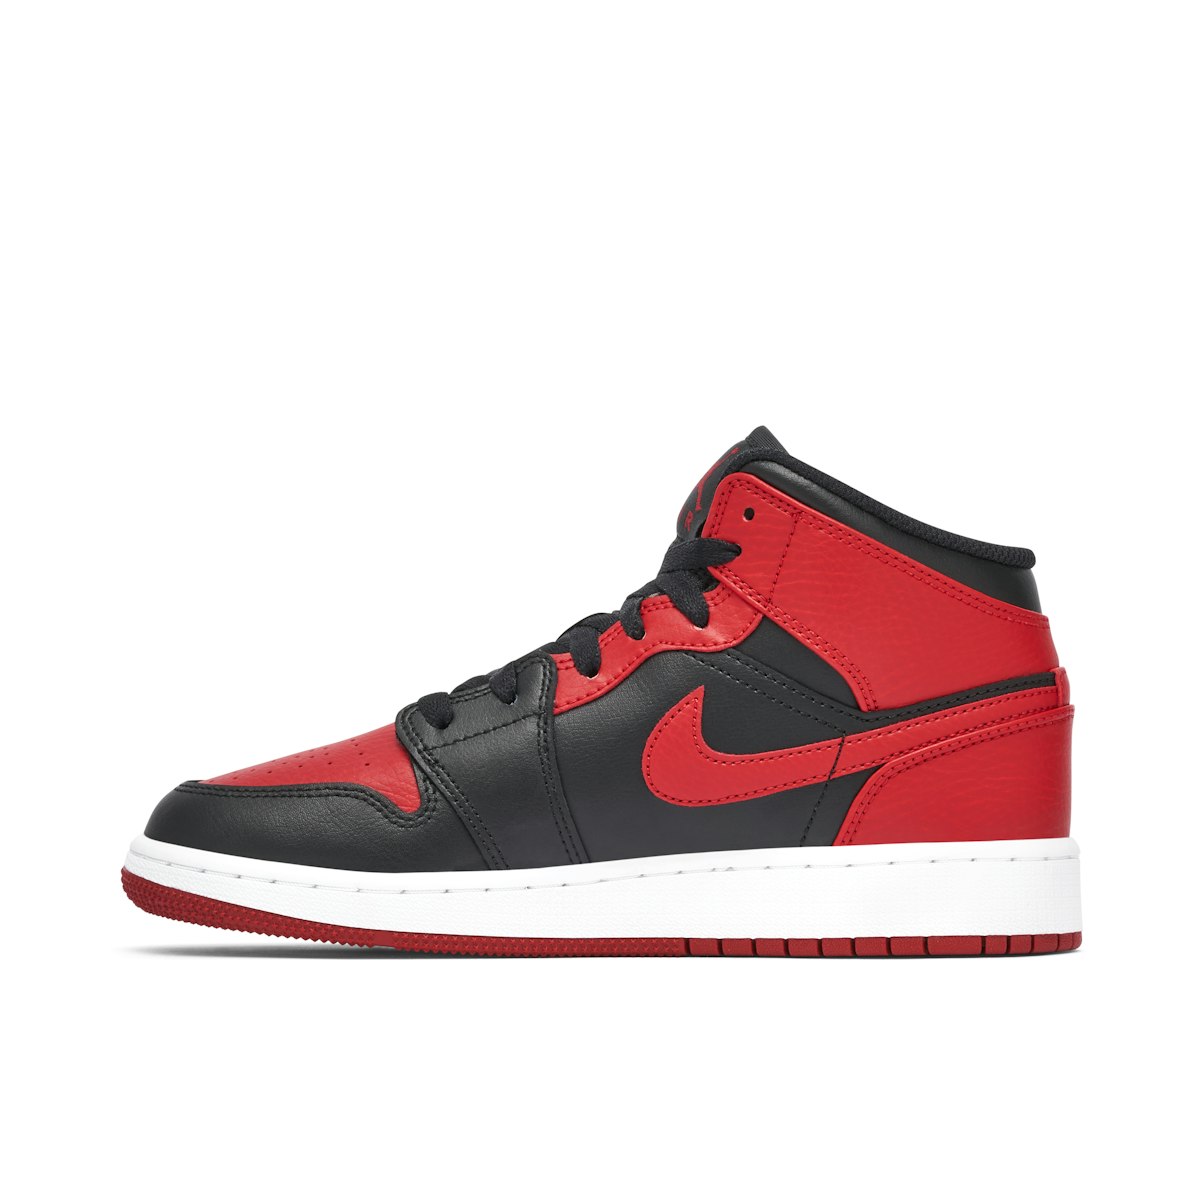 Nike Air Jordan 1 Mid Banned Black Red White 554724-074 Mens and GS New